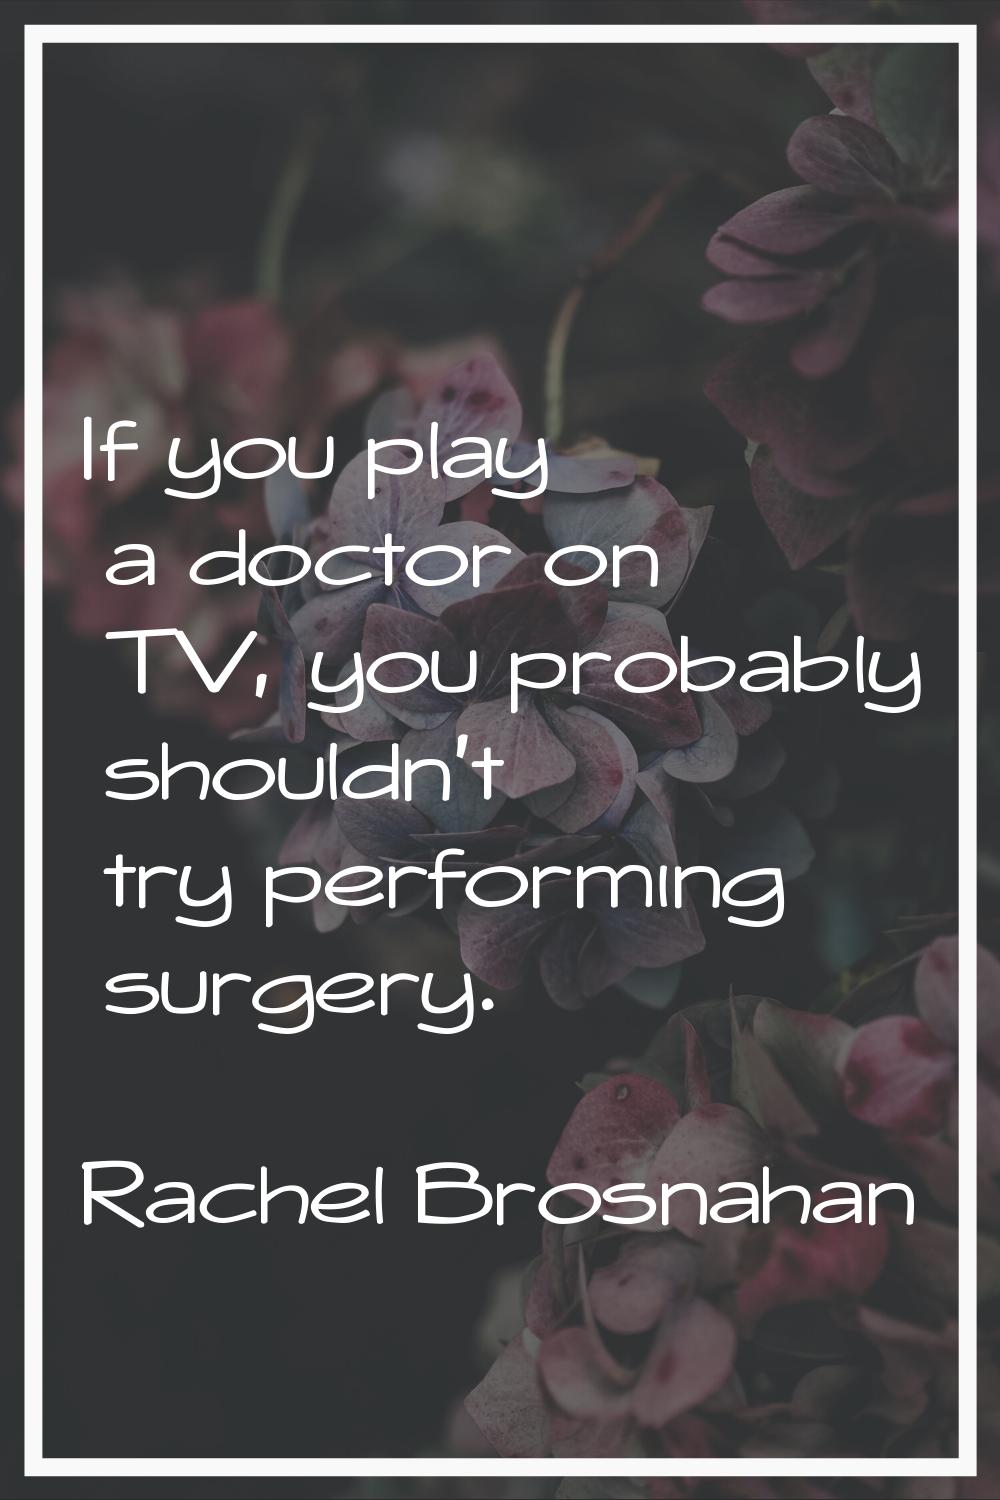 If you play a doctor on TV, you probably shouldn't try performing surgery.